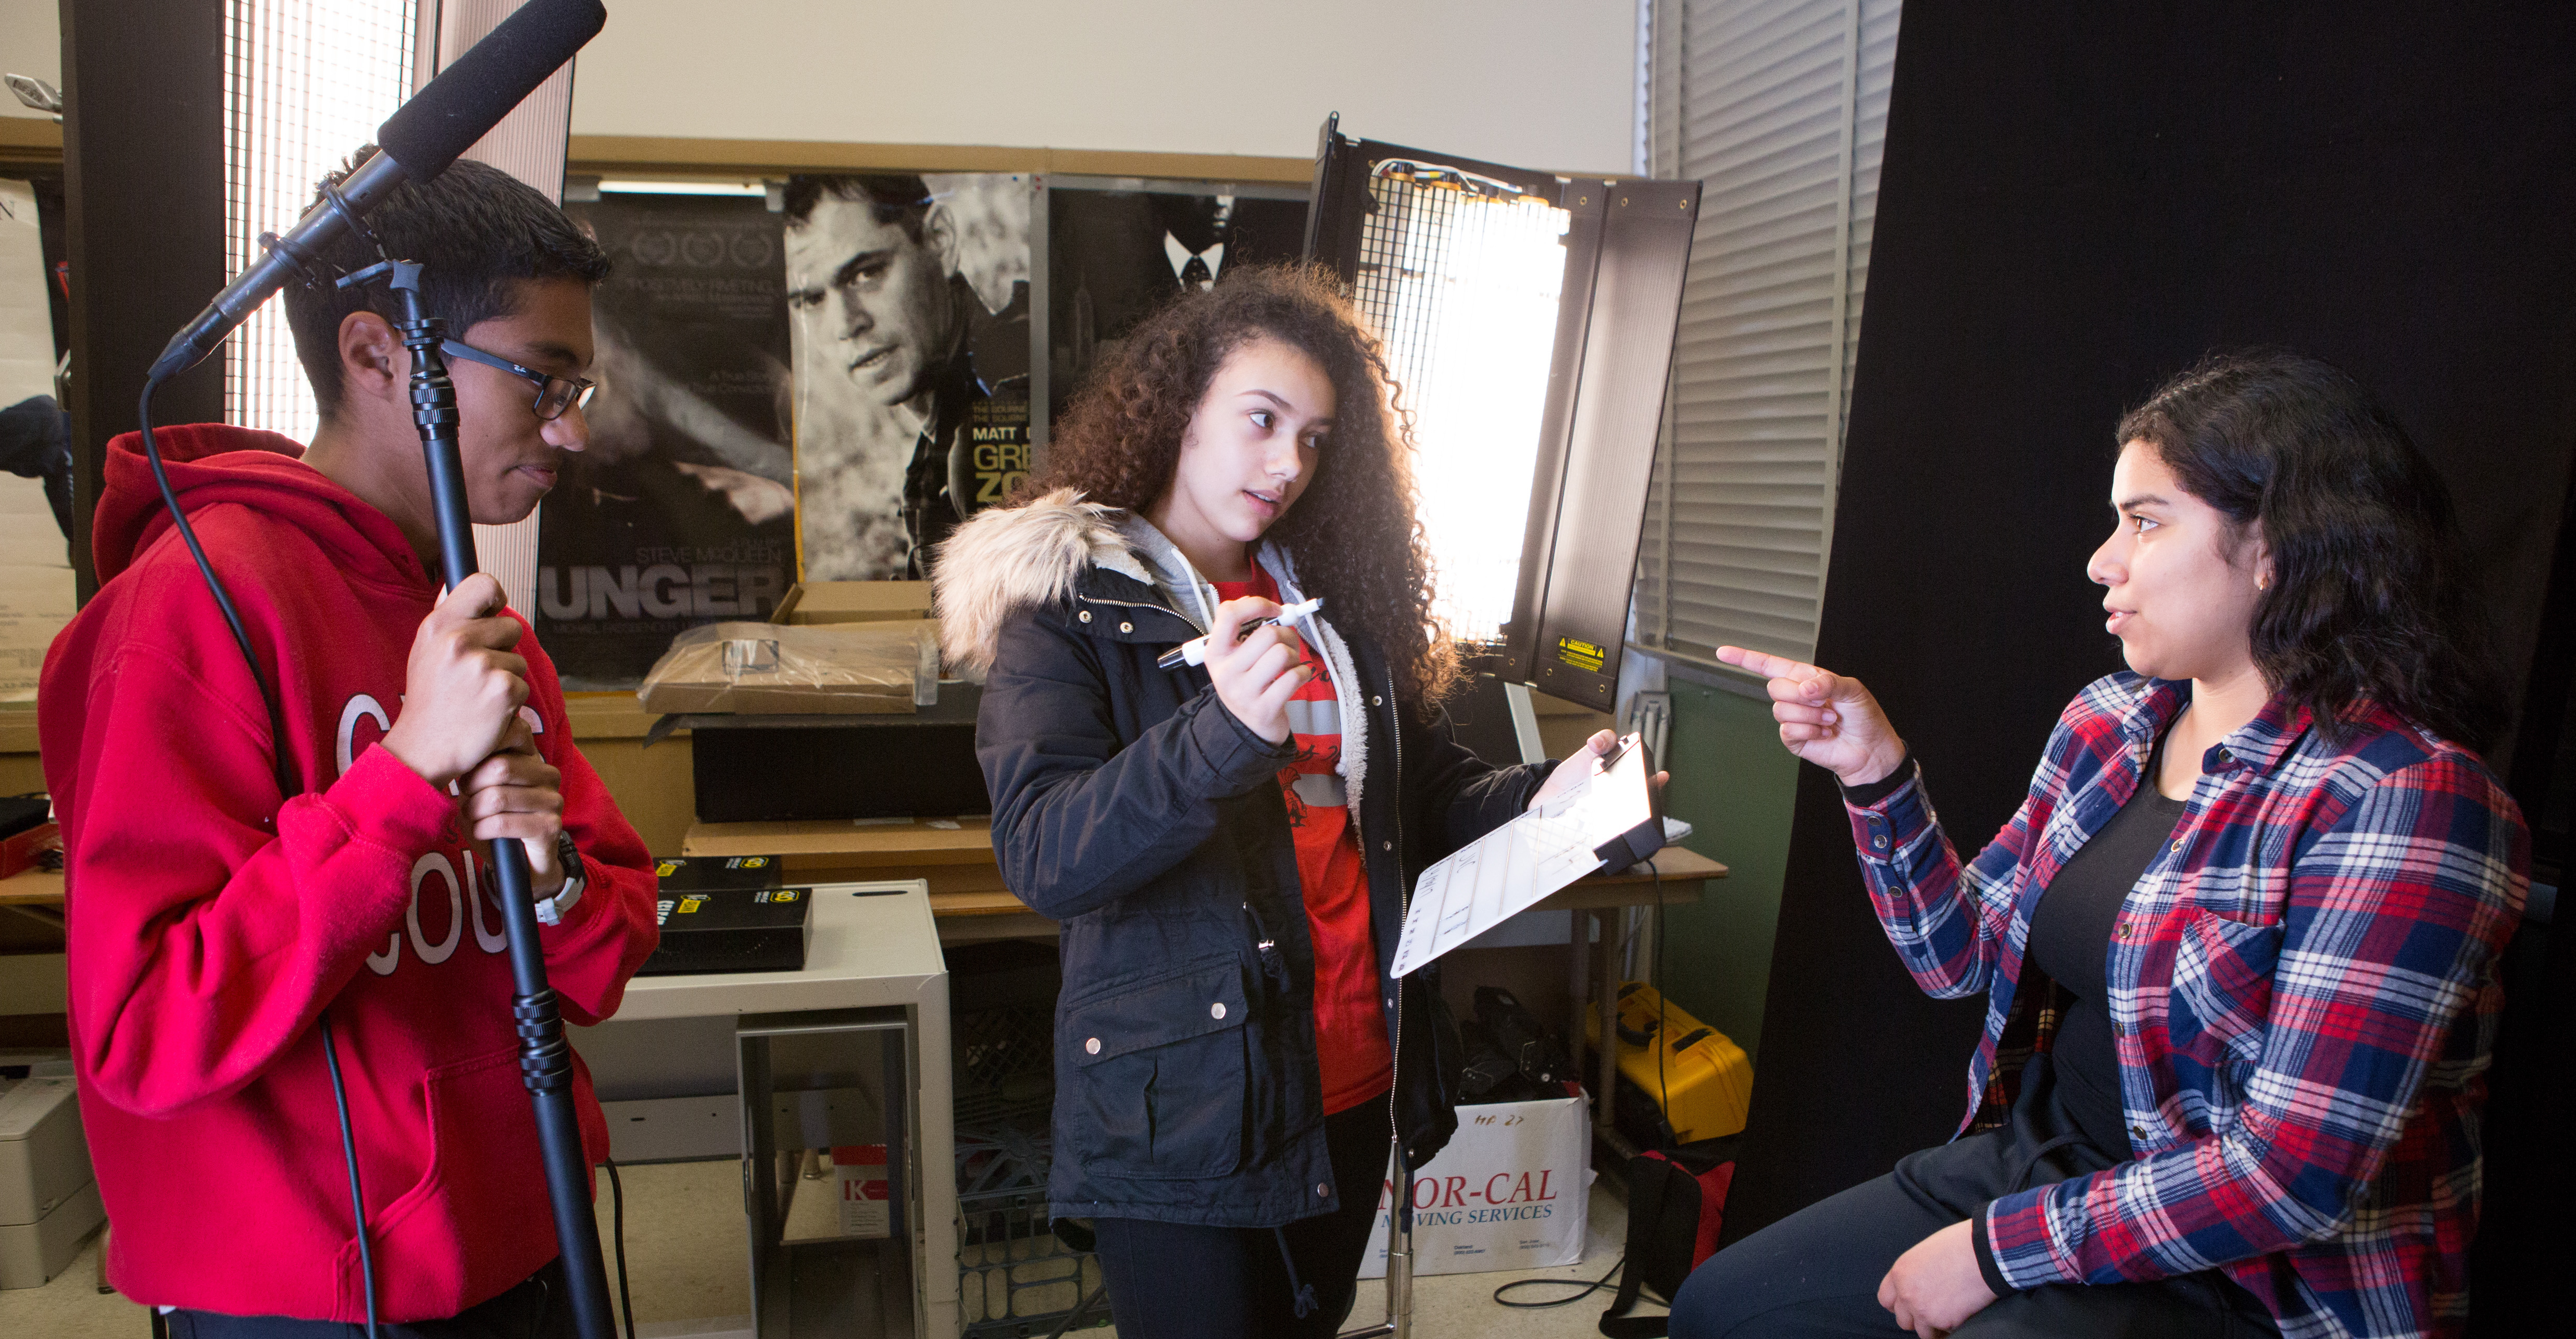 A teenaged girl with long tightly curly hair holds a pen and clipboard. A boy with short black hair and dark skin holds a boom microphone. They are interviewing a girl with a plaid shirt and shoulder length black wavy hair, who makes a point with her hand as she speaks. 